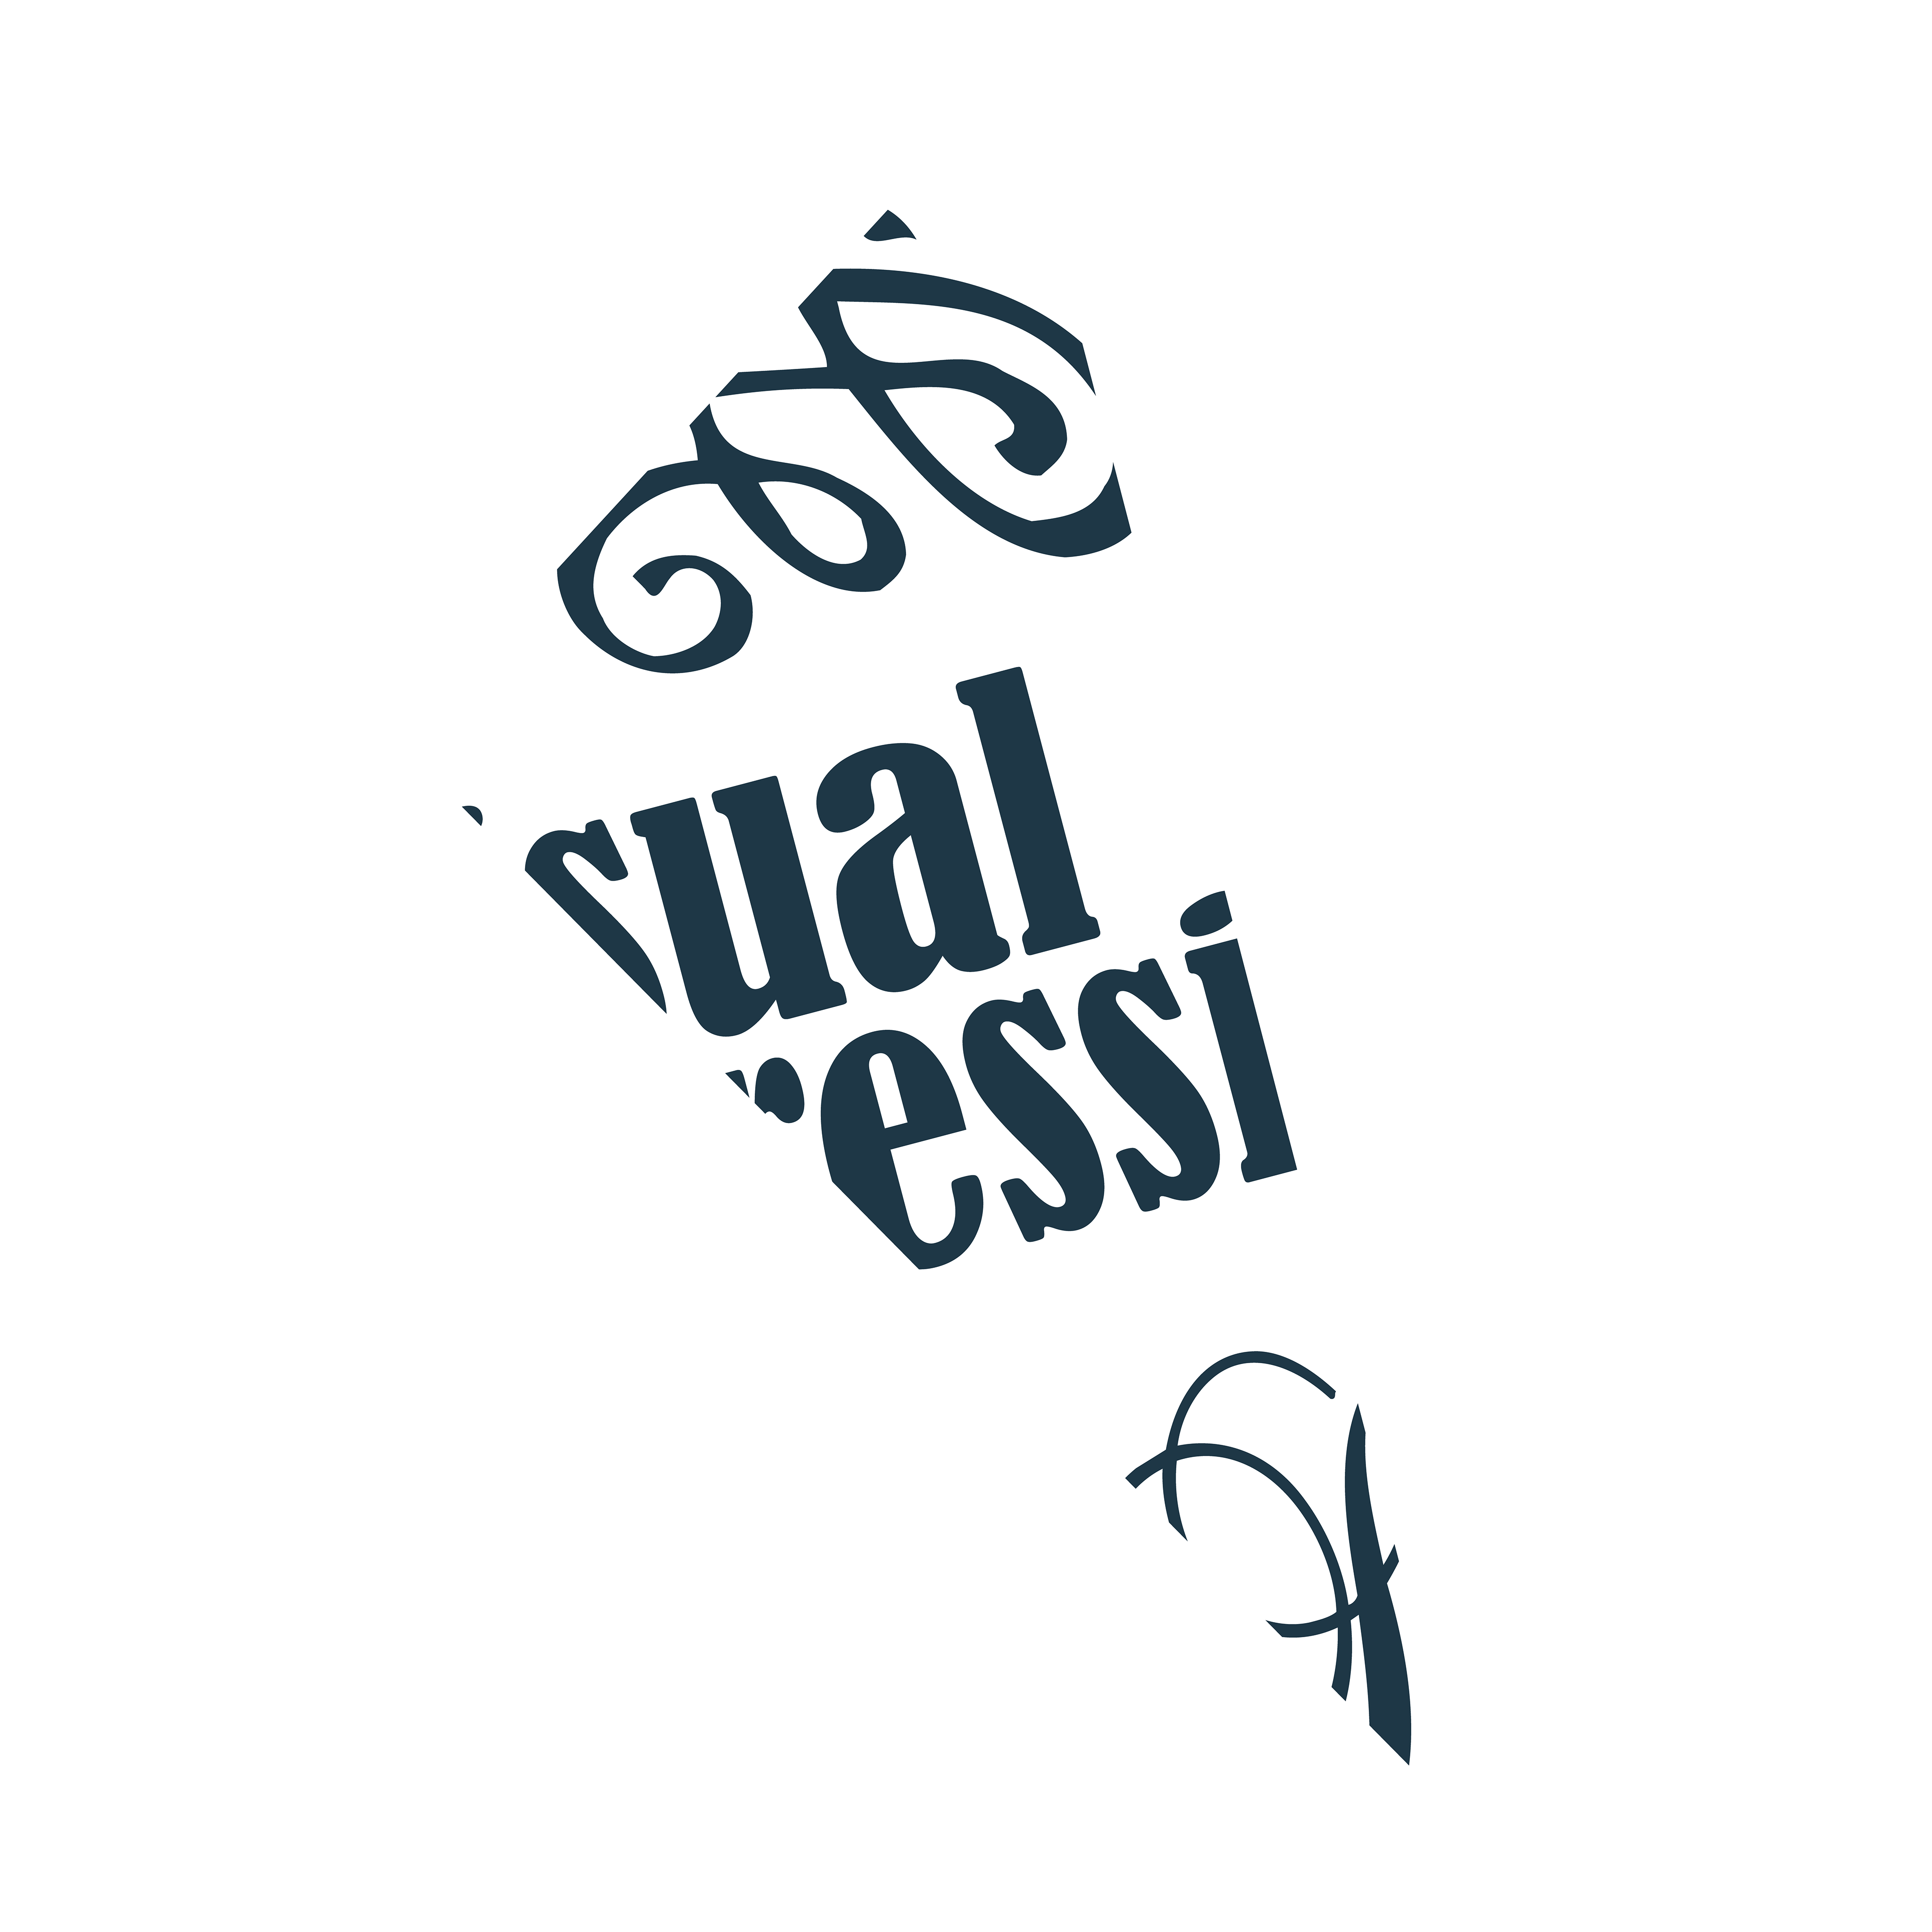 Visual Expressions Graphic Design & Printing